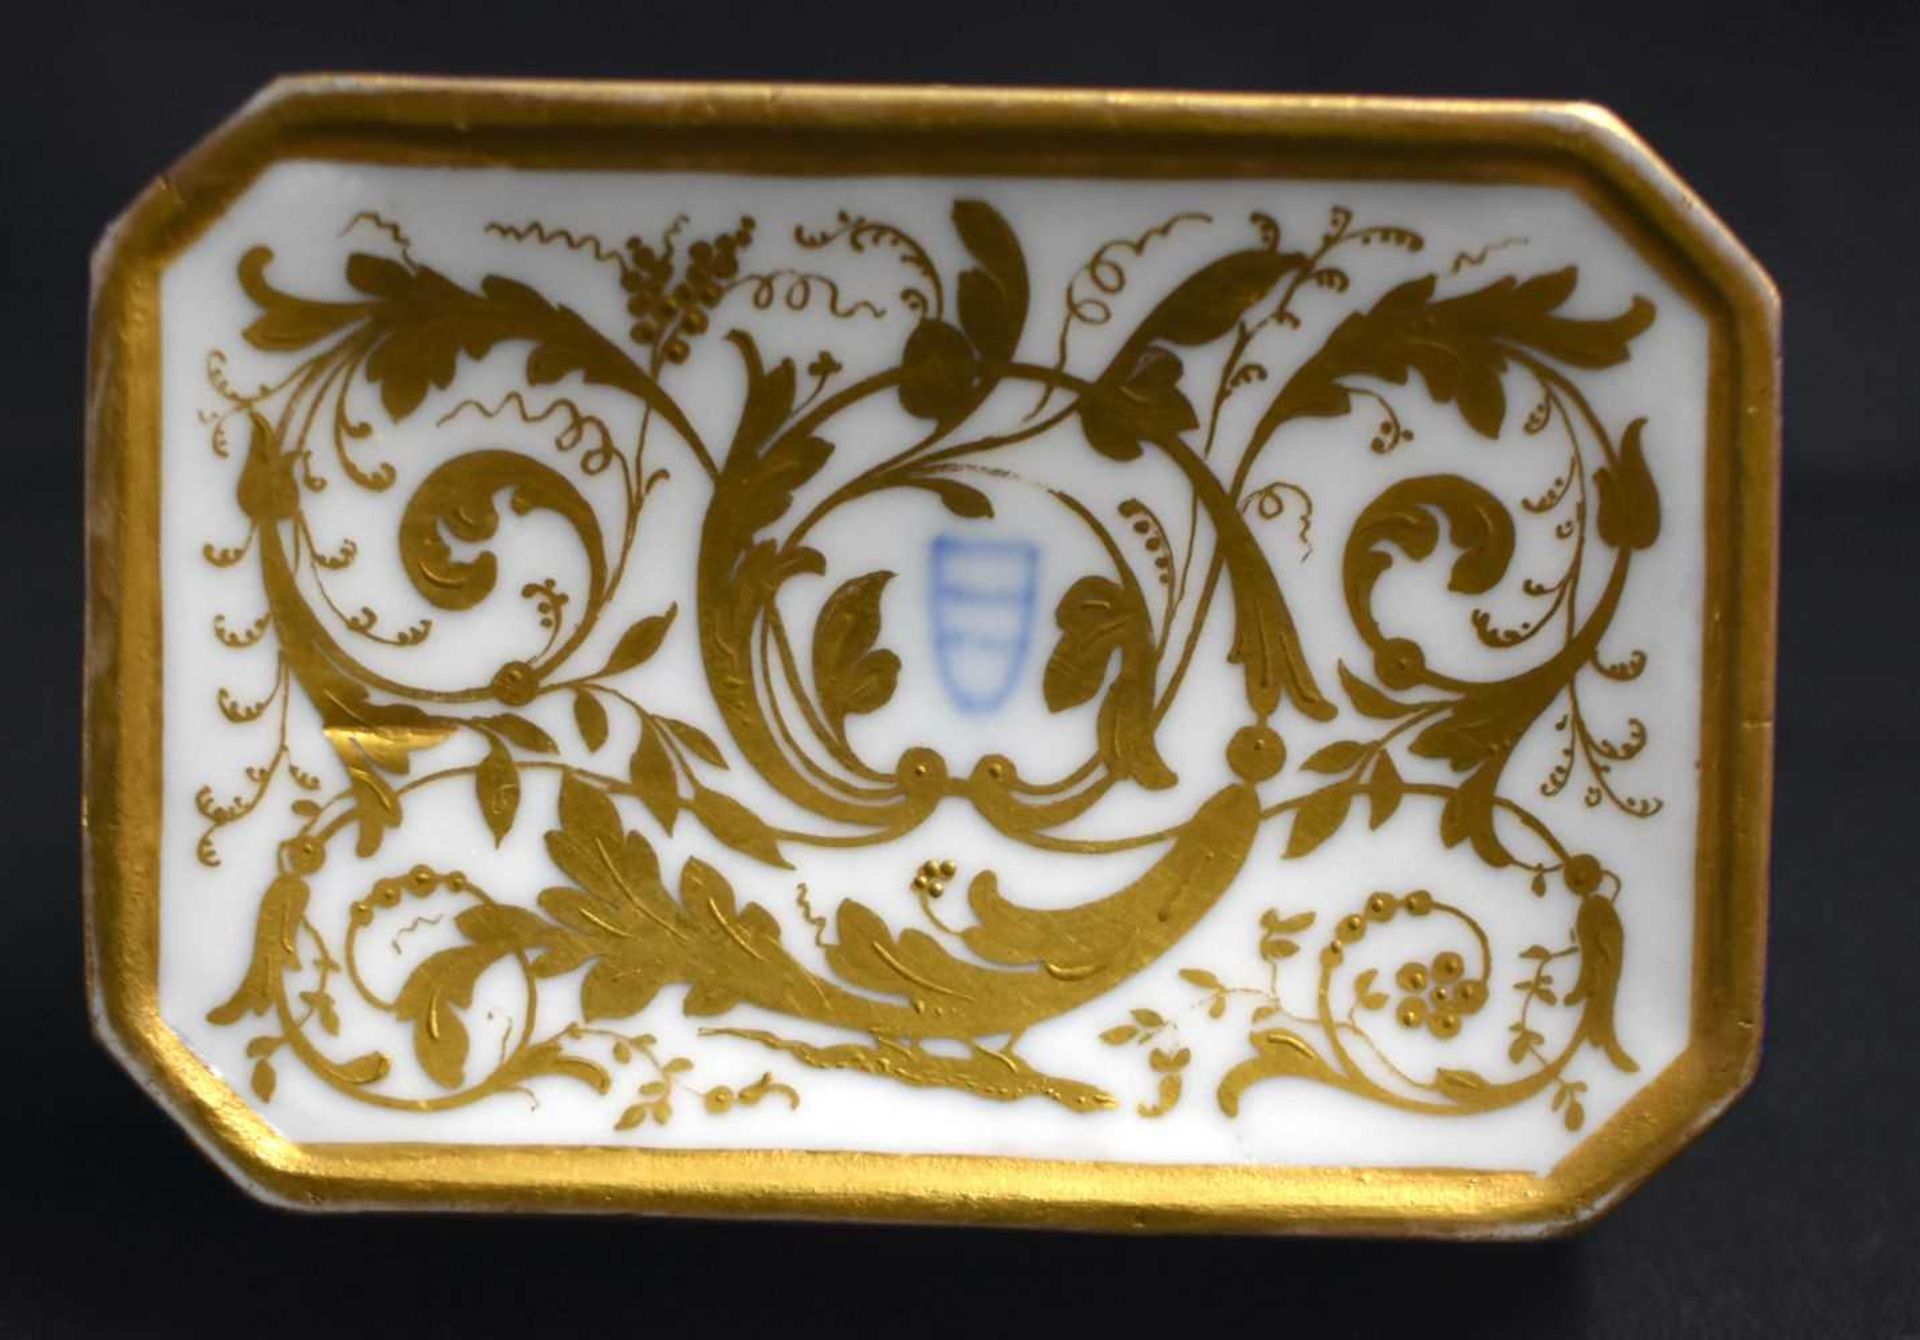 AN 18TH/19TH CENTURY AUSTRIAN VIENNA PORCELAIN BOX painted and jewelled in gilt with classical - Image 6 of 6